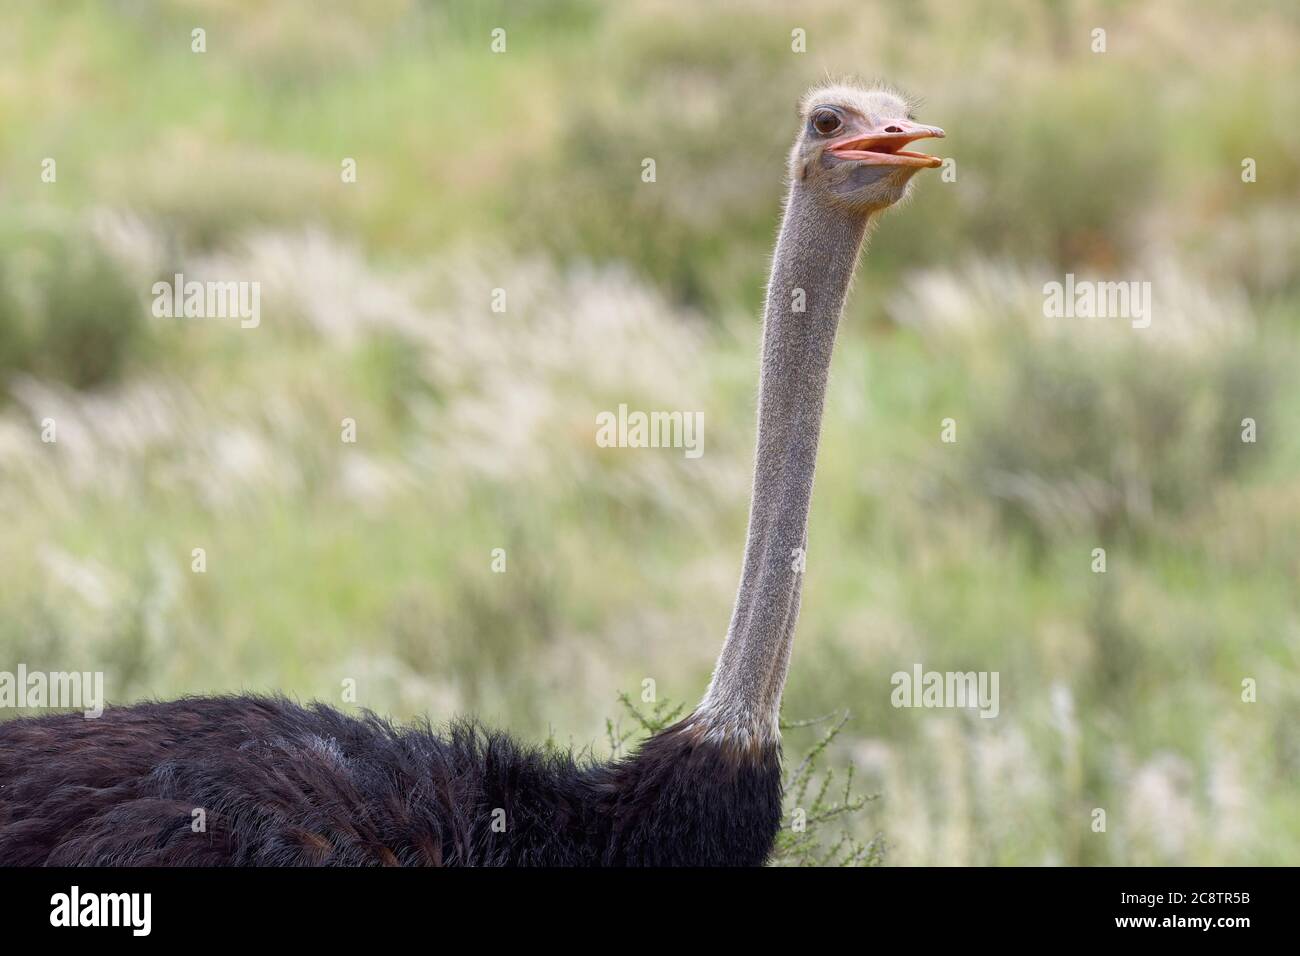 Common ostrich (Struthio camelus), adult male, animal portrait, Kgalagadi Transfrontier Park, Northern Cape, South Africa, Africa Stock Photo